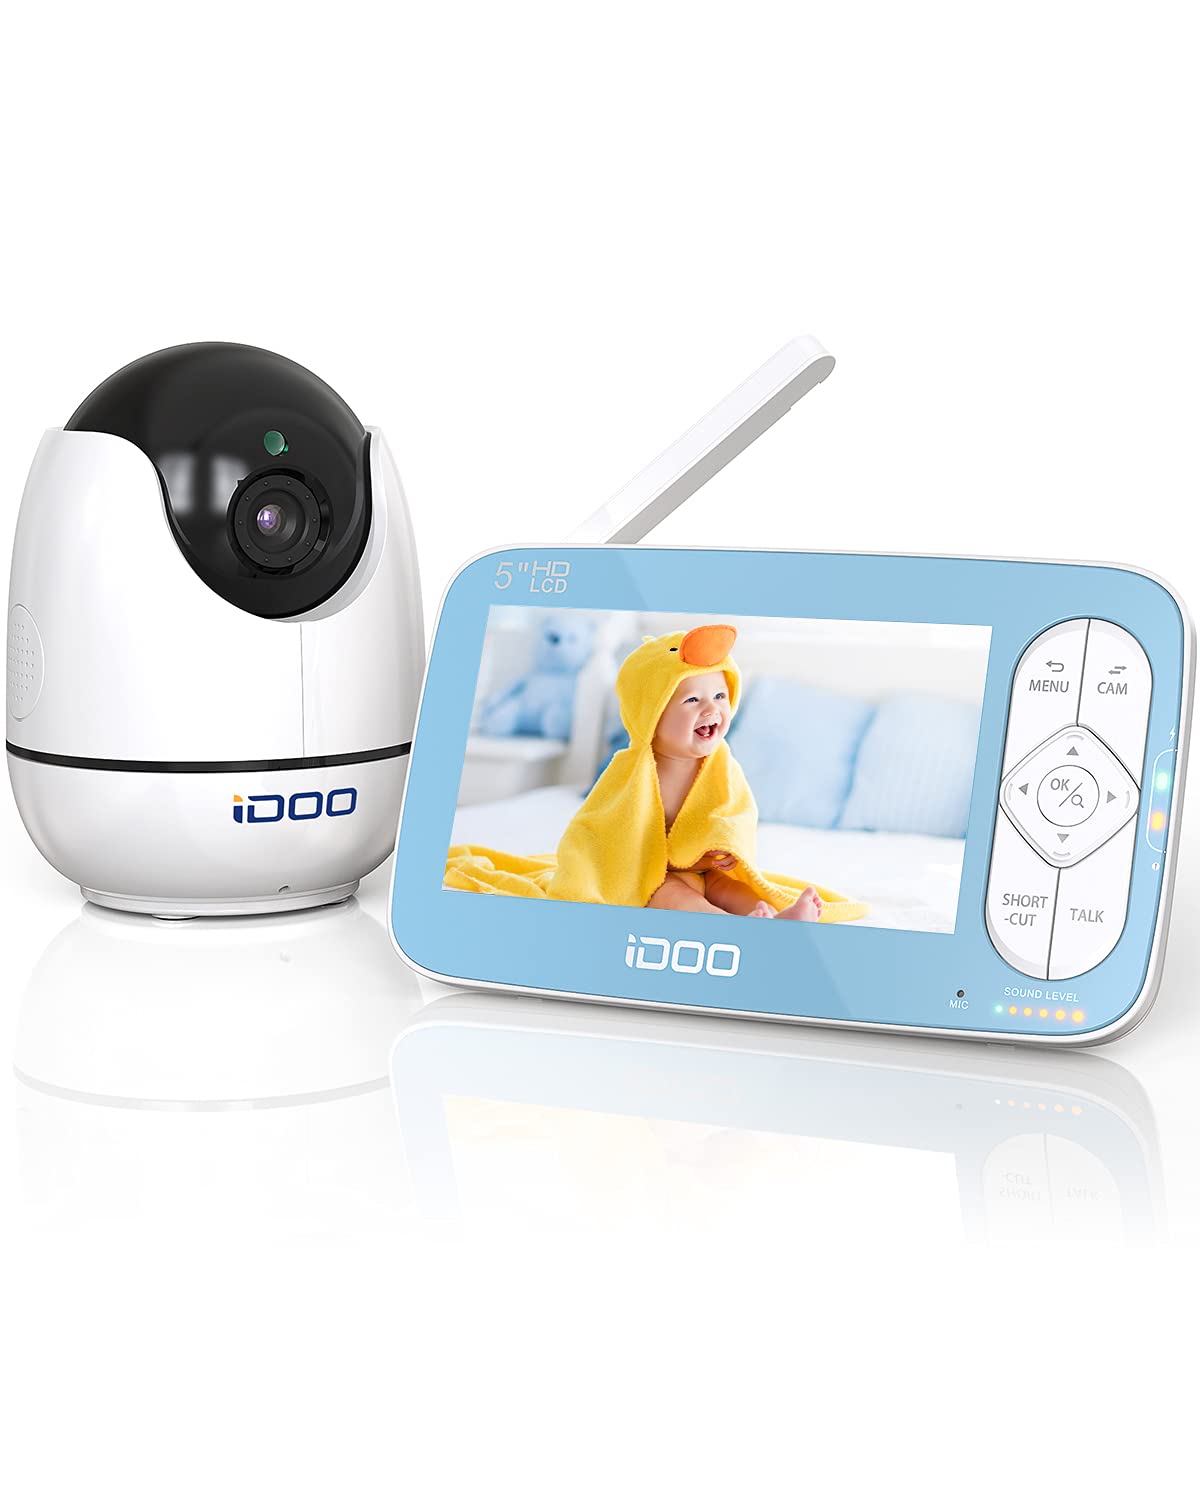 Baby Monitor with Camera, Large 5" 720P HD Display, iDOO Video Baby Monitor with Night Vision Clear Sound, Two-Way Talk, 270M Range, for Elderly Pet Twins